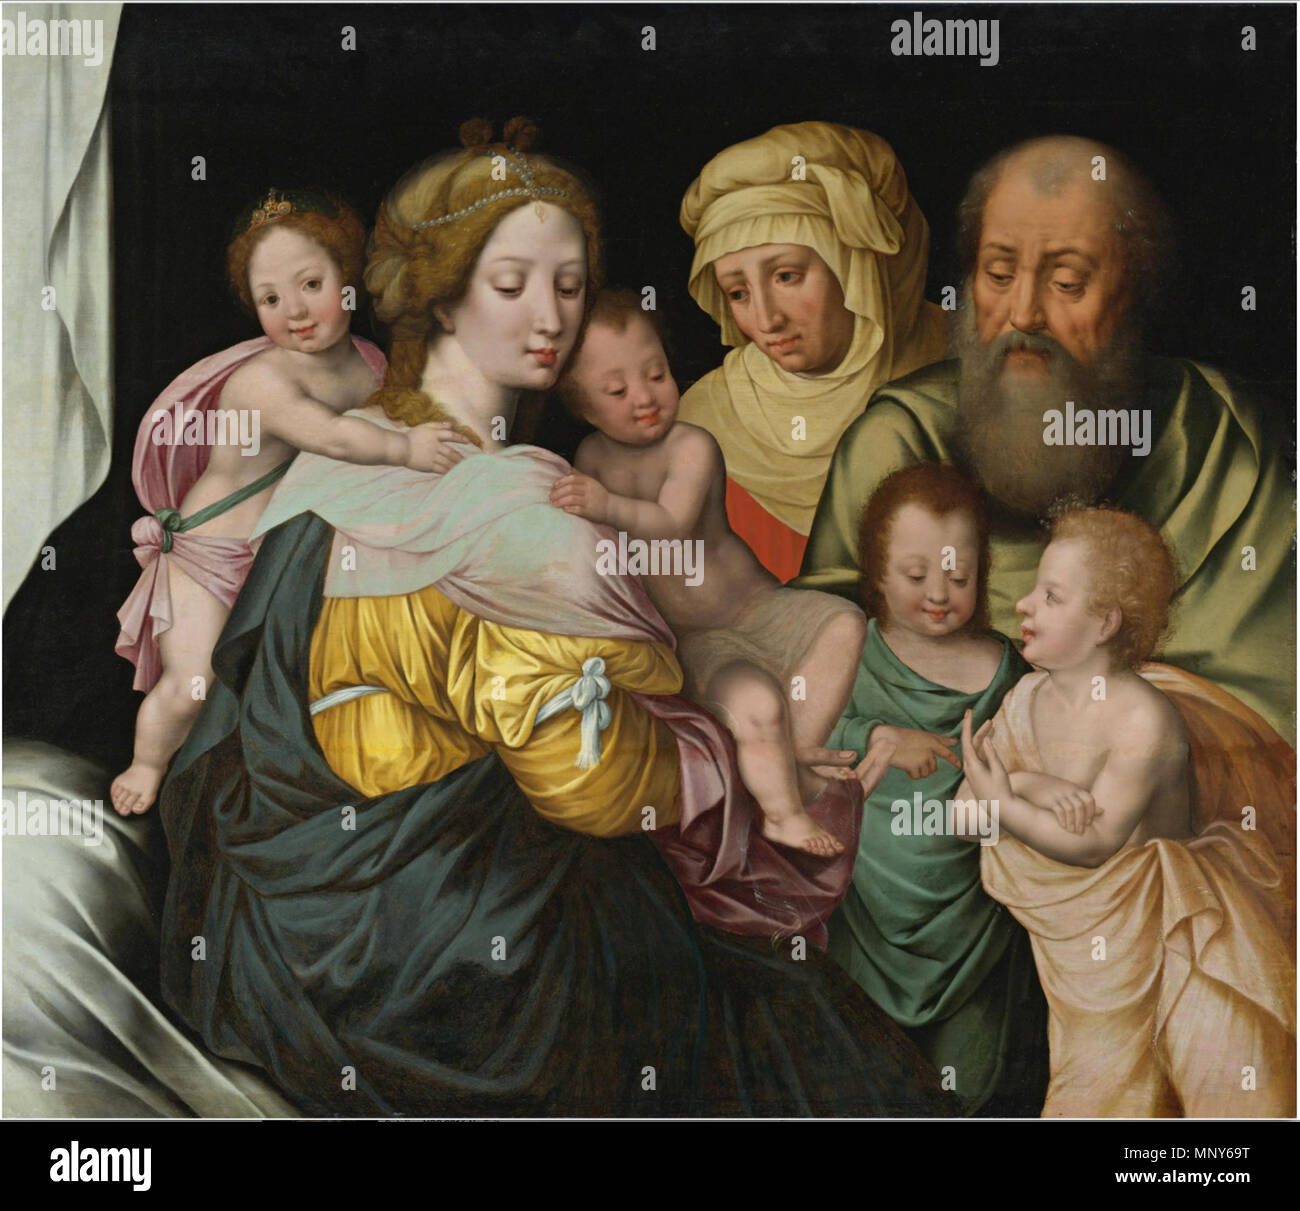 The Madonna and Child with Saints Elizabeth and other Members of the Holy Family   16th century.   1237 Vincent Sellaer - The Madonna and Child with Saints Elizabeth and other Members of the Holy Family Stock Photo